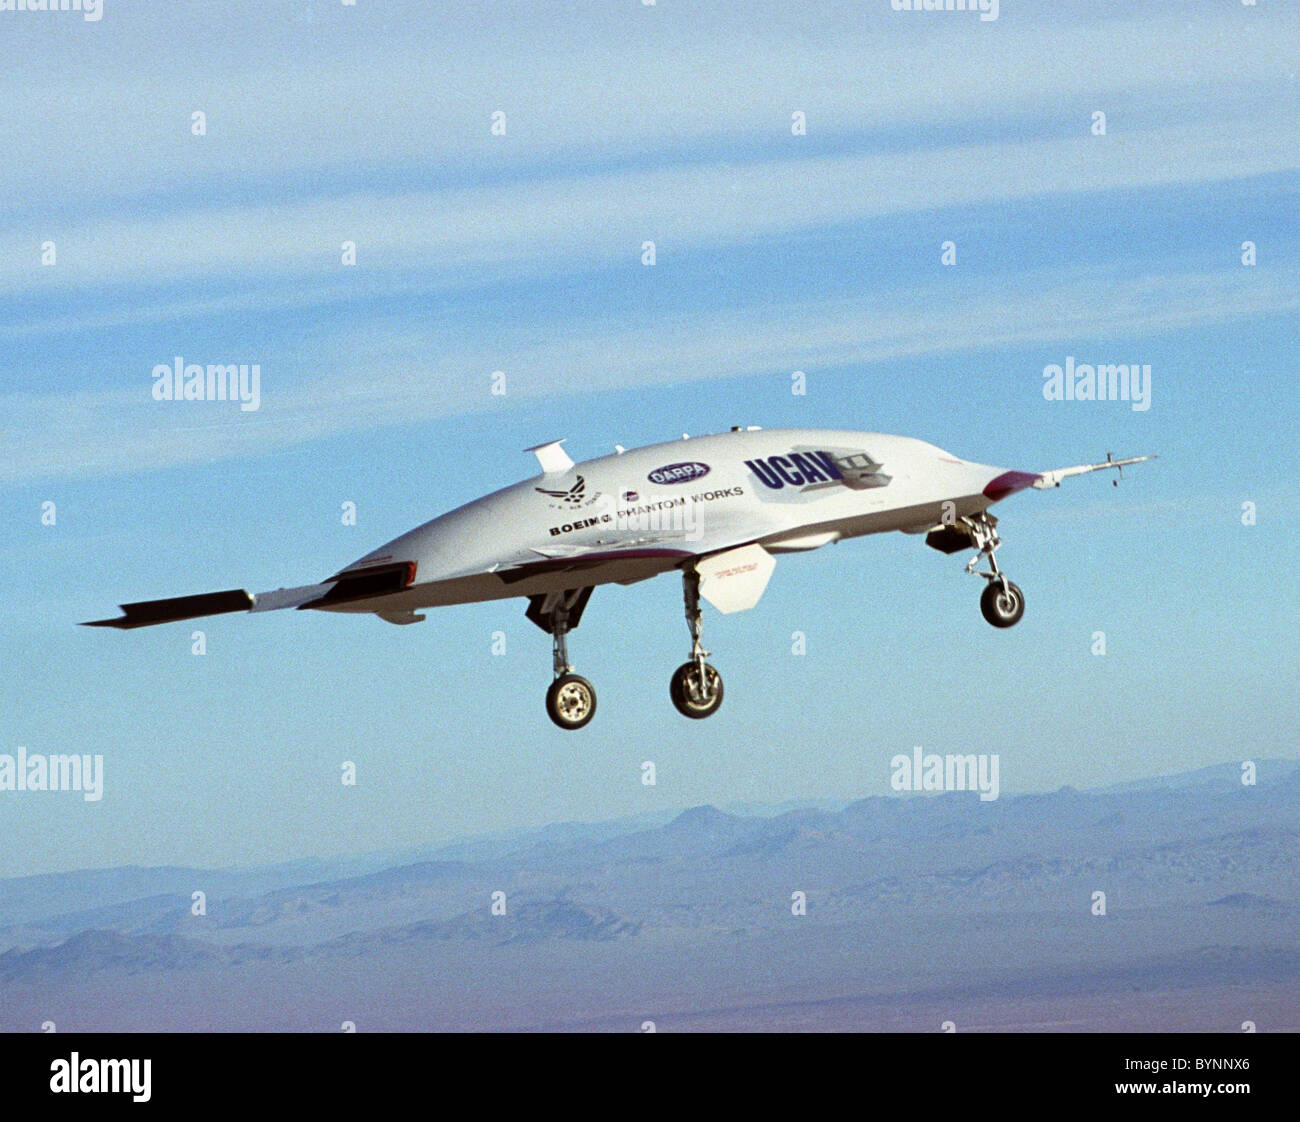 X-45 Unmanned Combat Air Vehicle (UCAV) The X-45 is an unmanned, autonomous  combat air vehicle that flies high-risk operational Stock Photo - Alamy